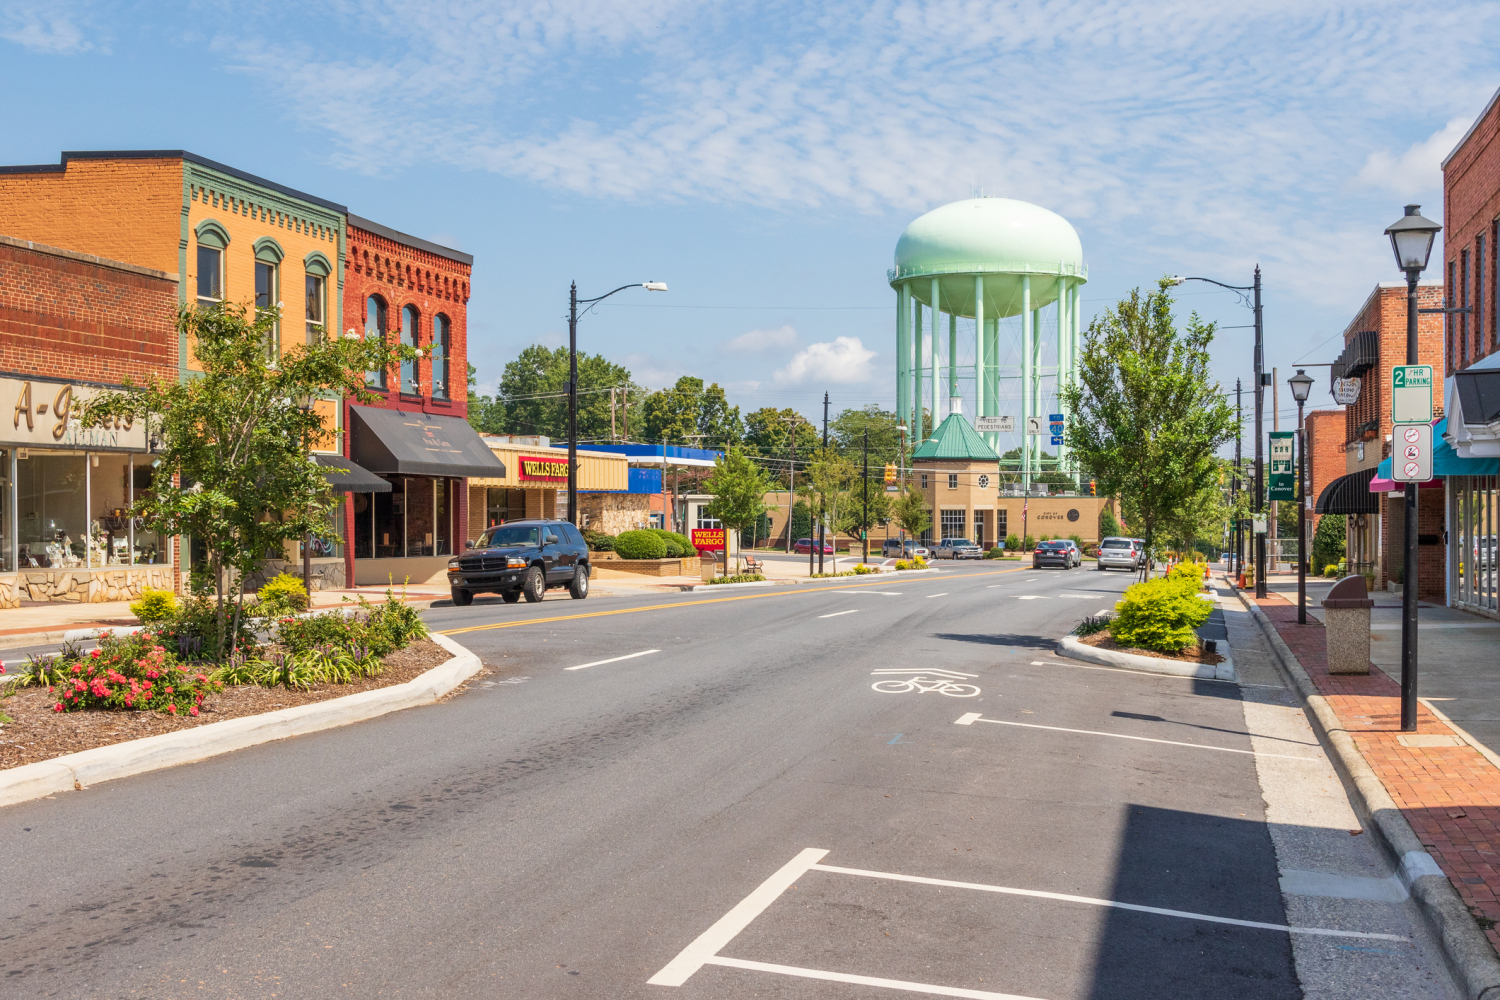 The main street of Conover, NC, a small southern town. Small shops line the street on each side, and light green water tower is visible in the distance.